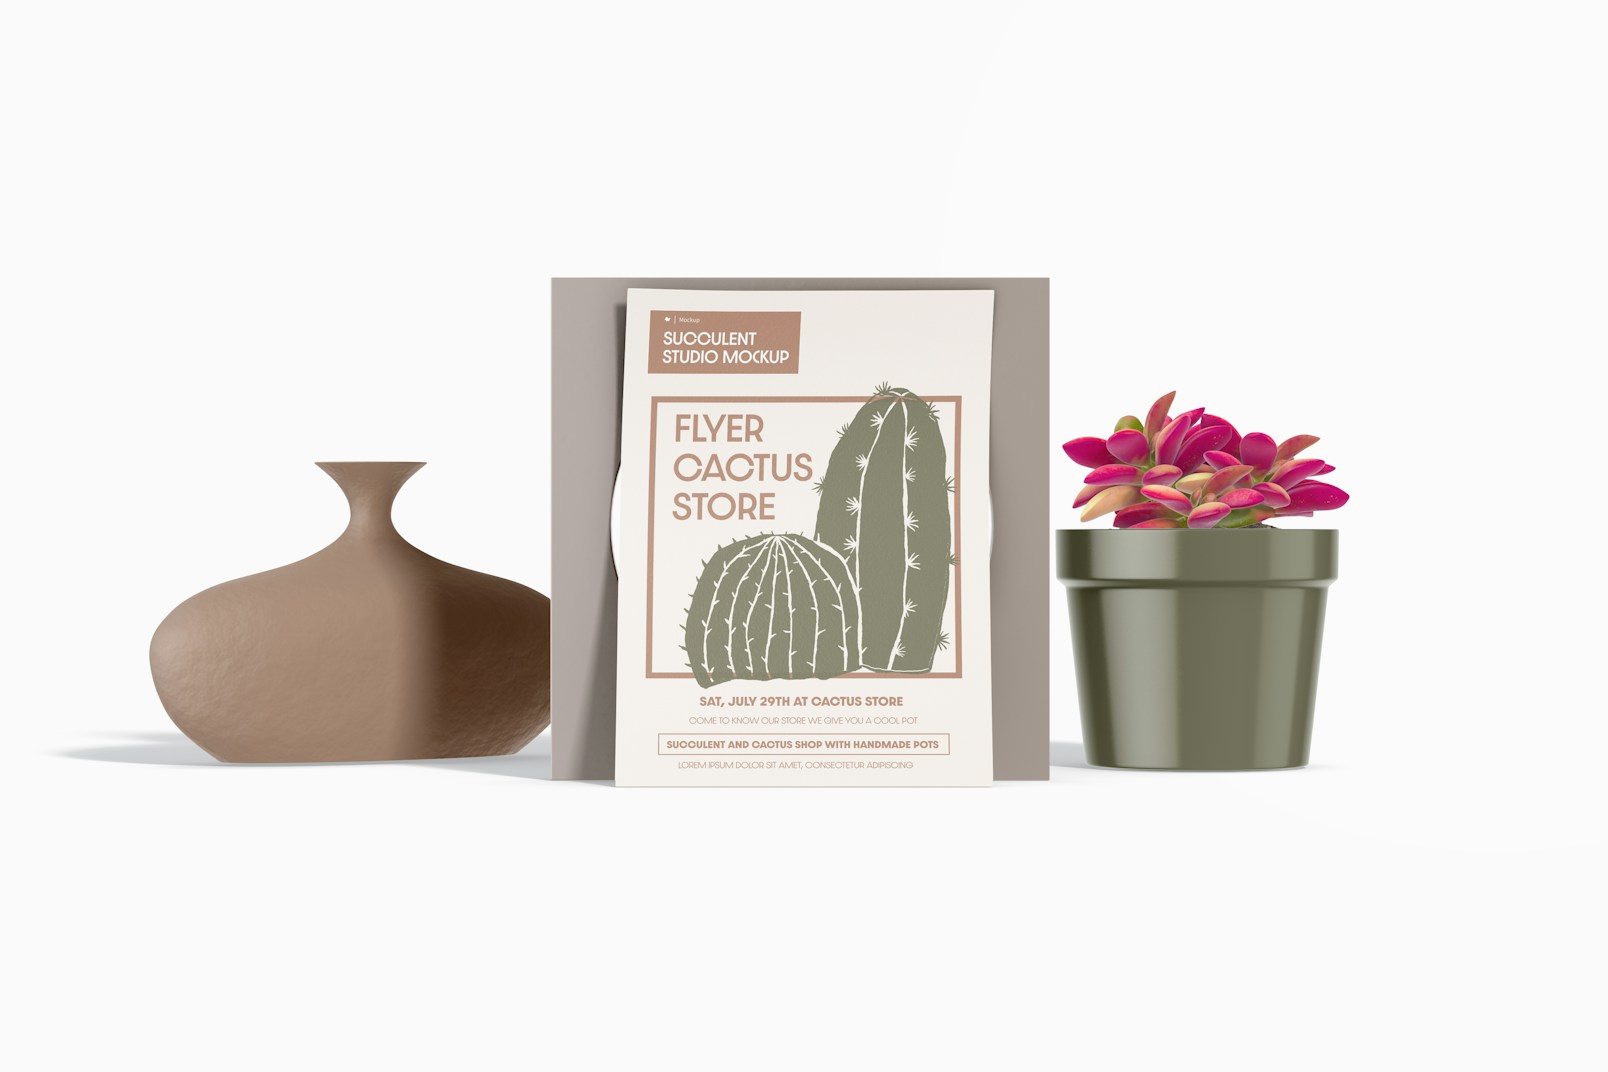 Flyer Cactus Store Mockup, Front View